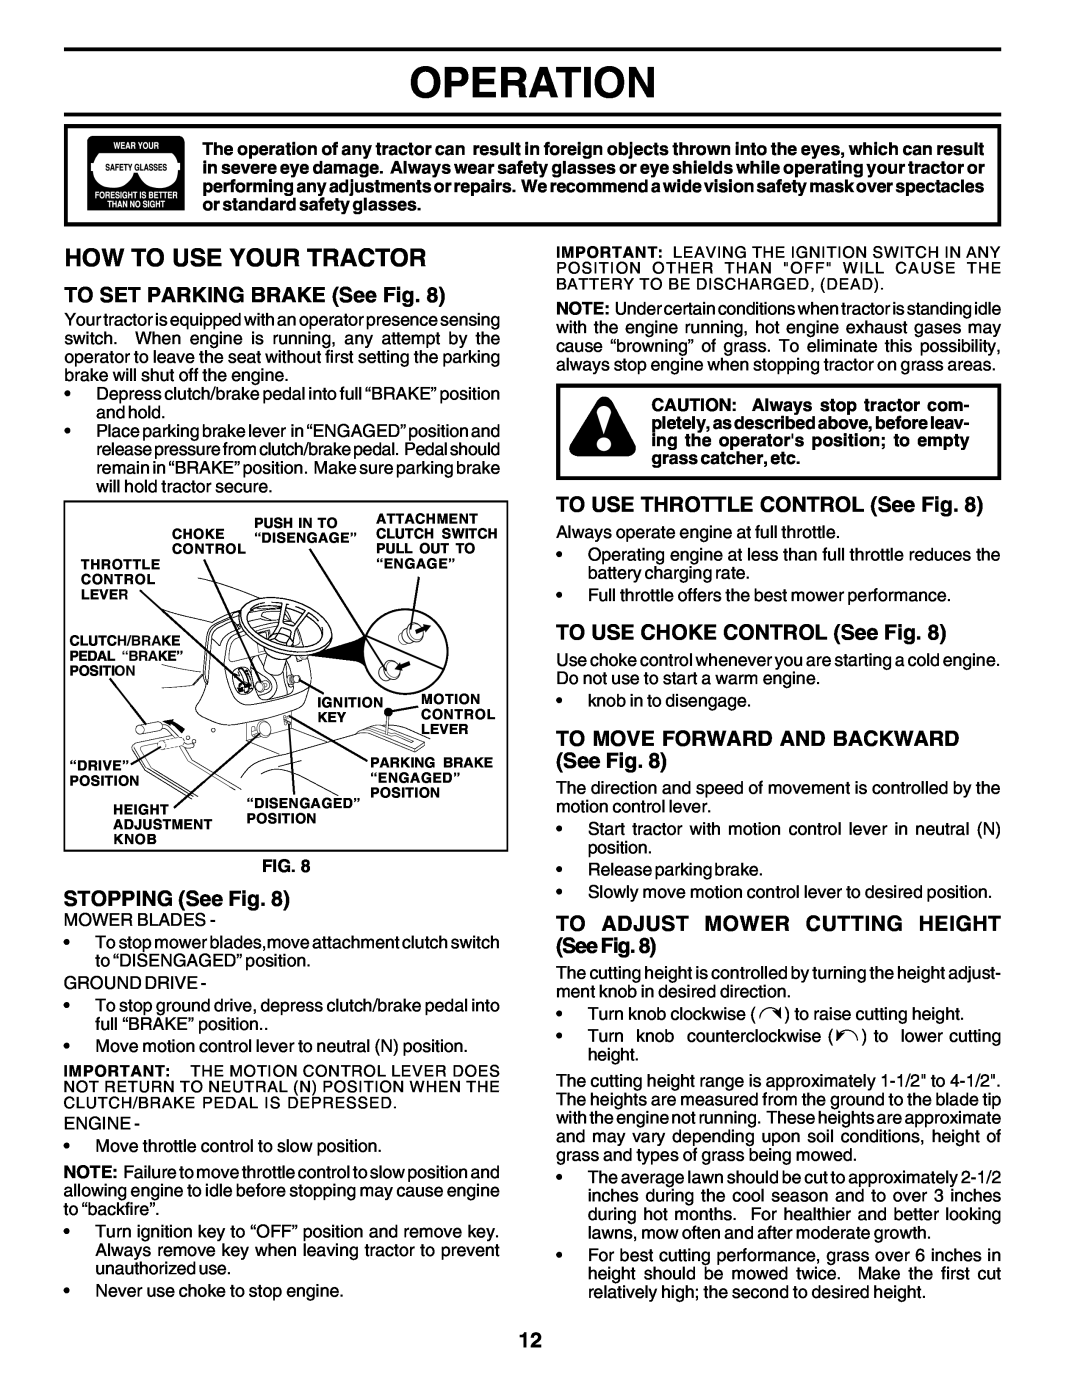 Poulan 176873 owner manual How To Use Your Tractor, Operation, TO SET PARKING BRAKE See Fig, STOPPING See Fig 